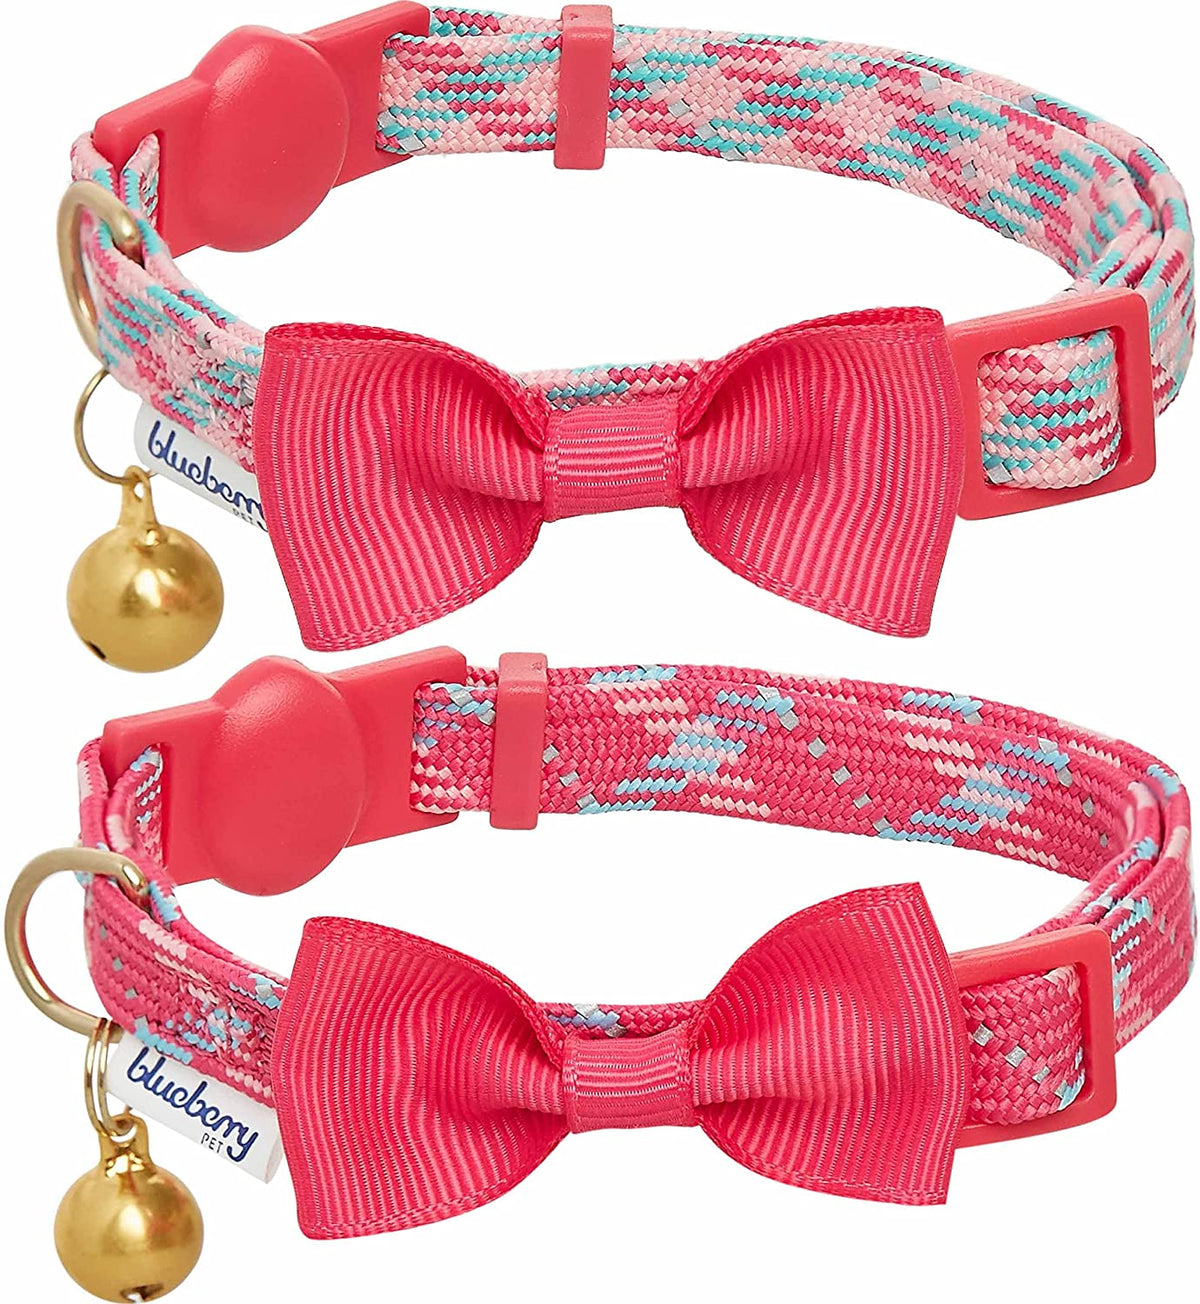 Bell & Bow Tie Reflective Striped Cat Collar w/Pink Hues - Southern Agriculture